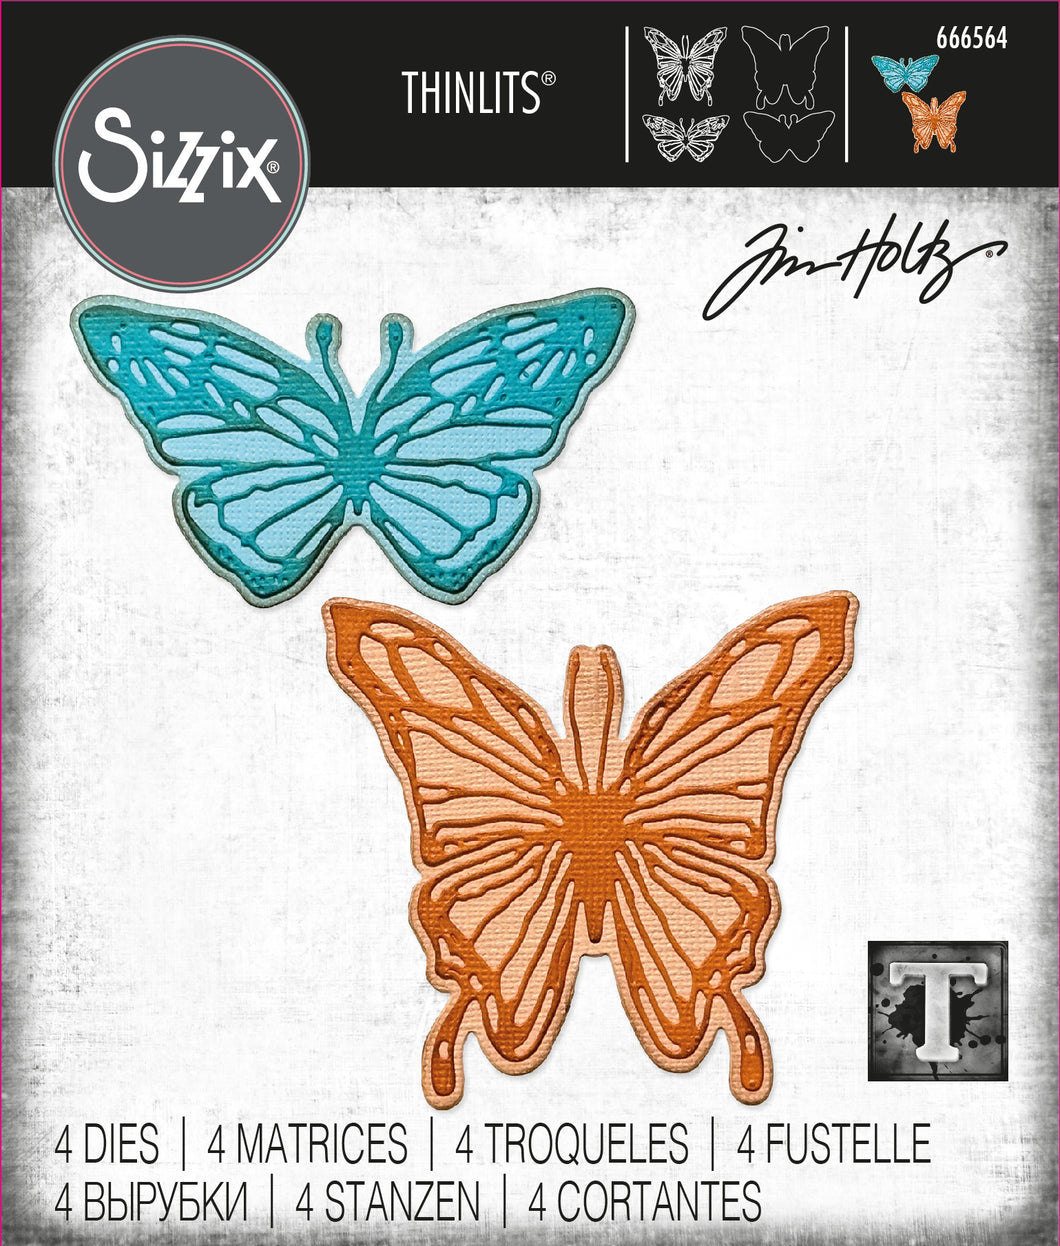 Sizzix Thinlits Vault Scribbly Butterfly Die by Tim Holtz (666564)